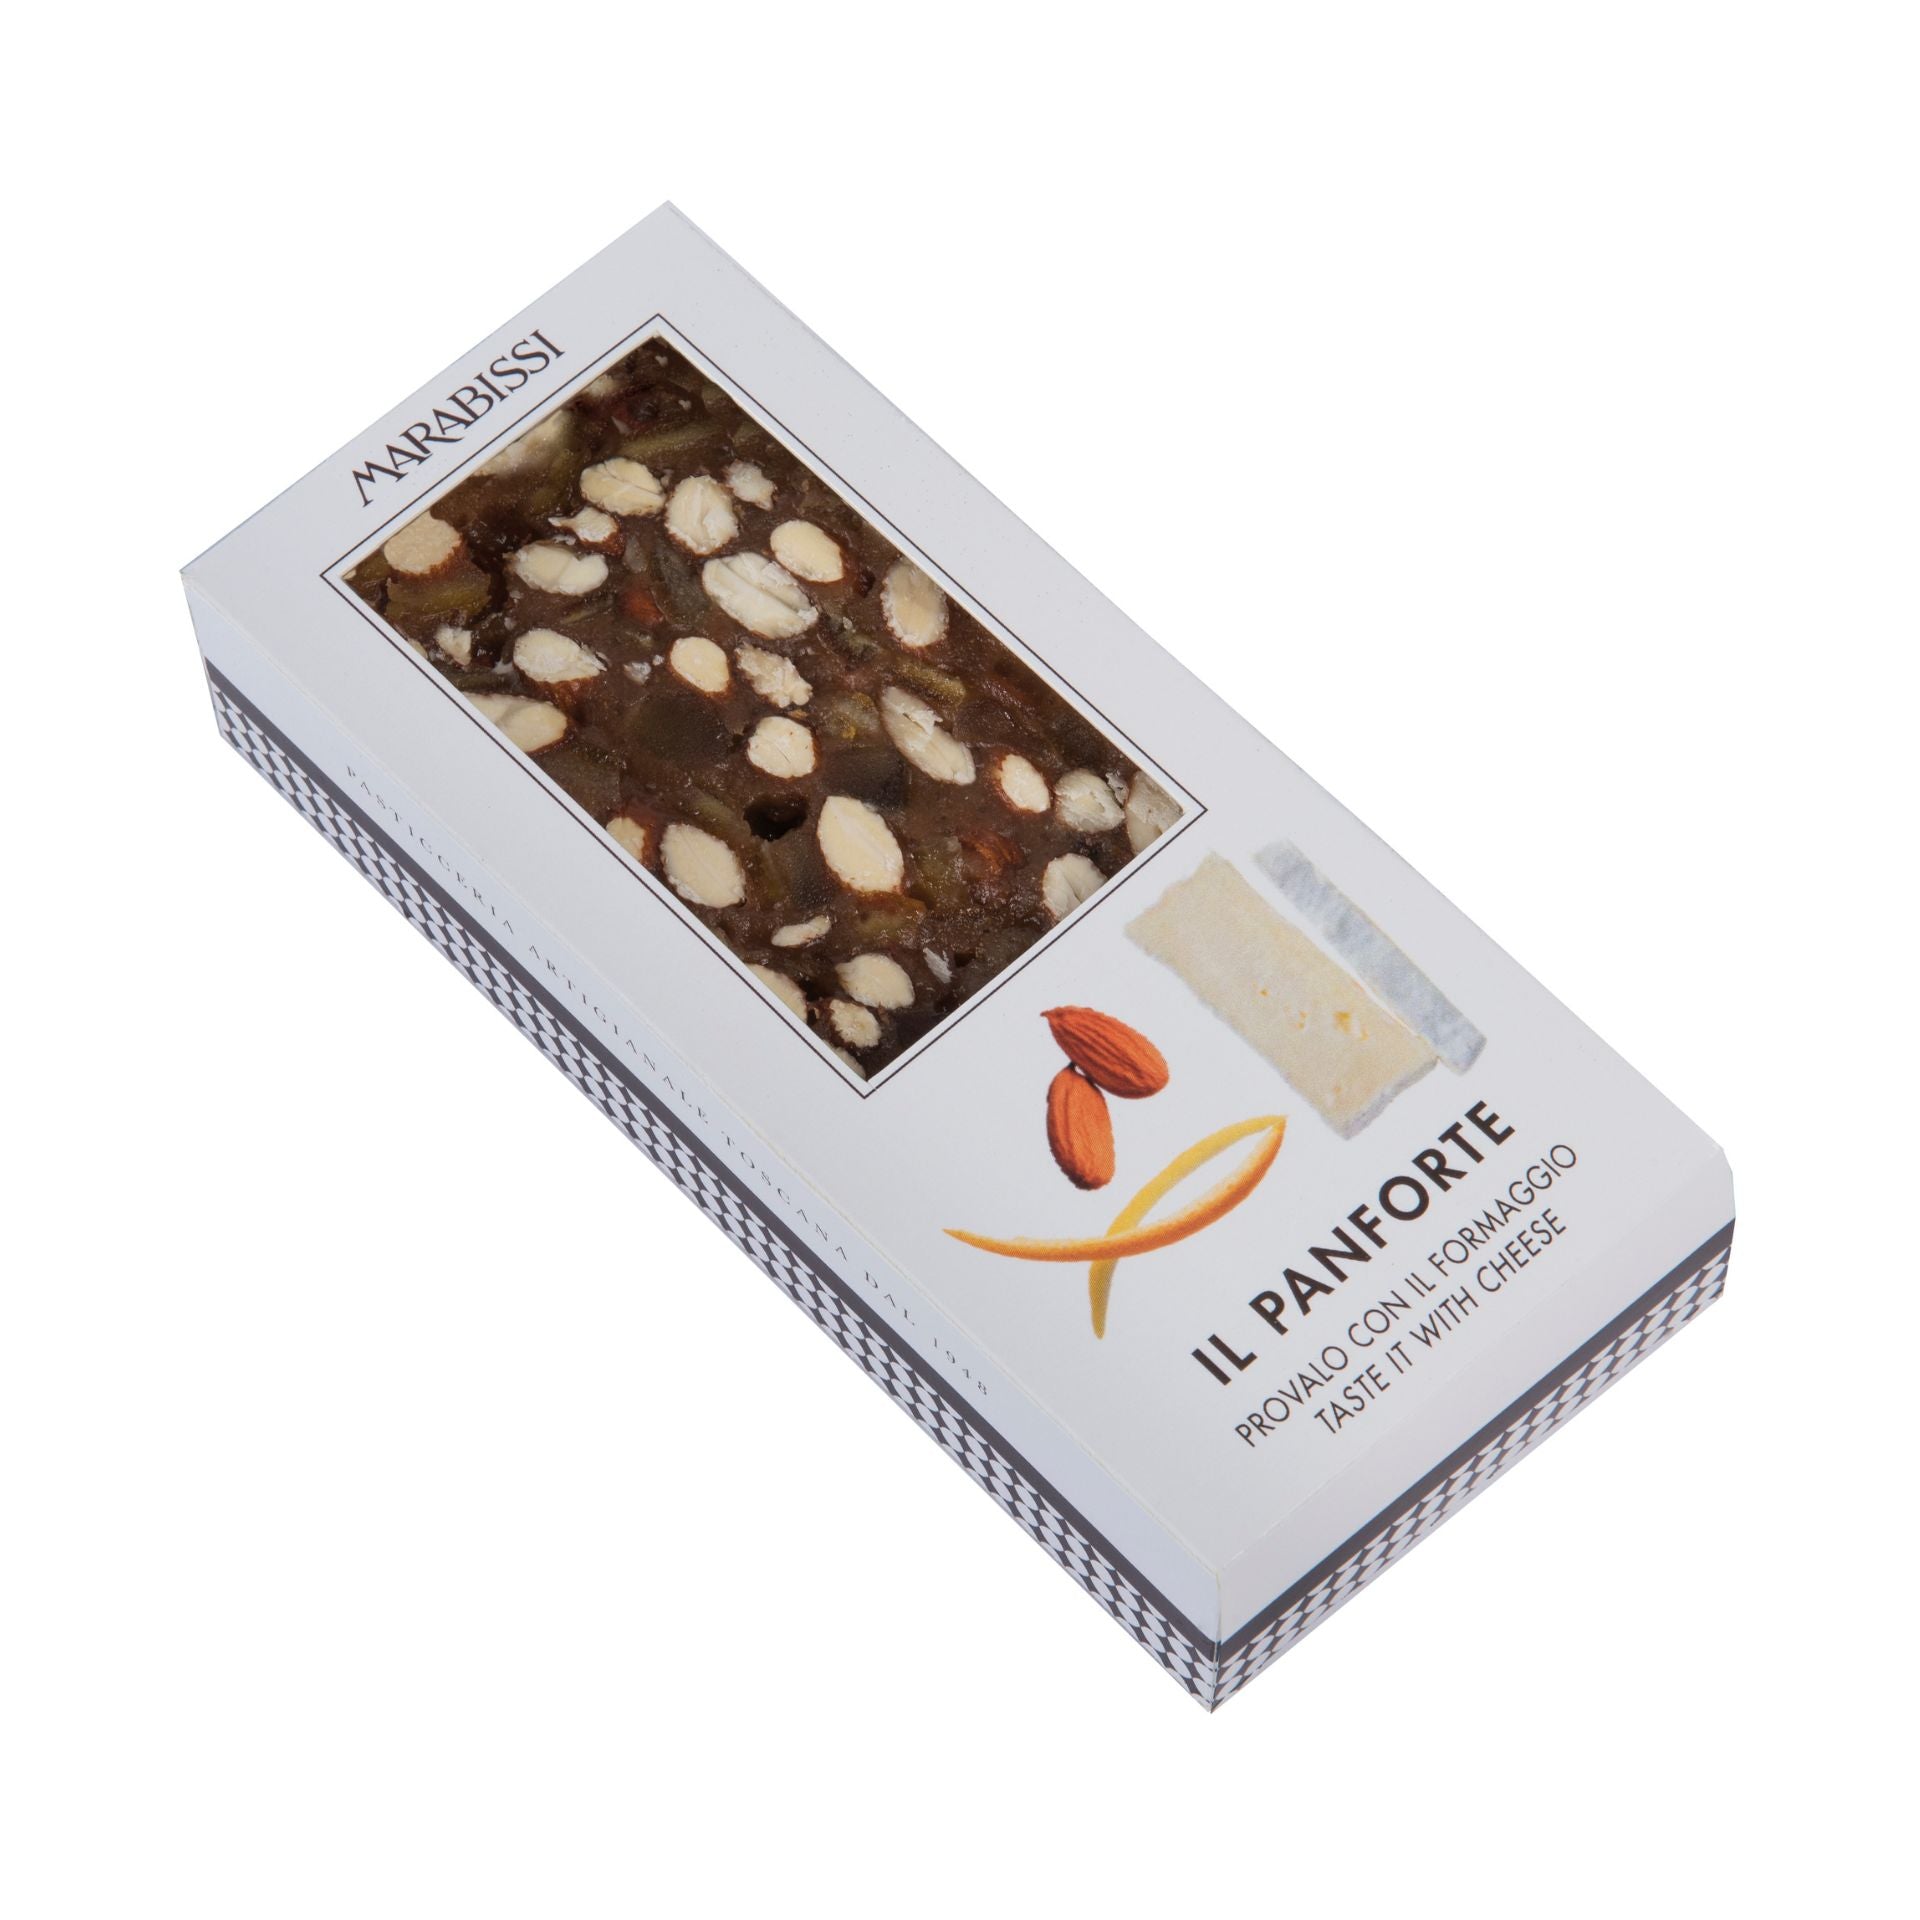 Marabissi Plain Panforte Cake (Box) 200g  | Imported and distributed in the UK by Just Gourmet Foods